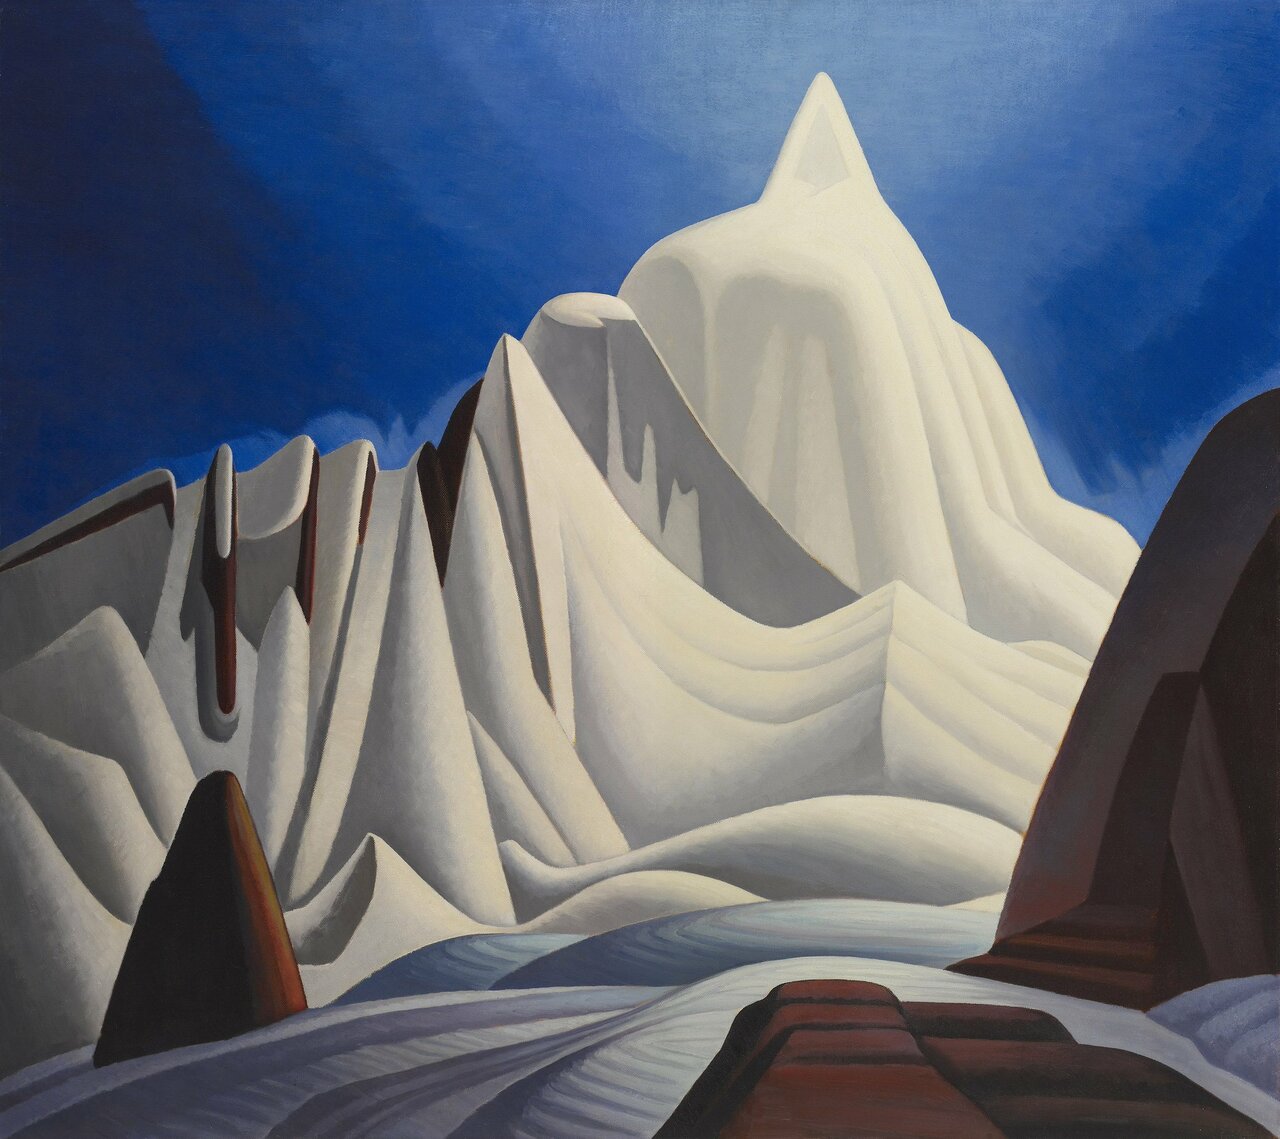 Discover #LawrenHarris, Canada's pioneer of modernist landscape, through 30 iconic works: http://bit.ly/1TILB7G https://t.co/RXQ14XjVbw